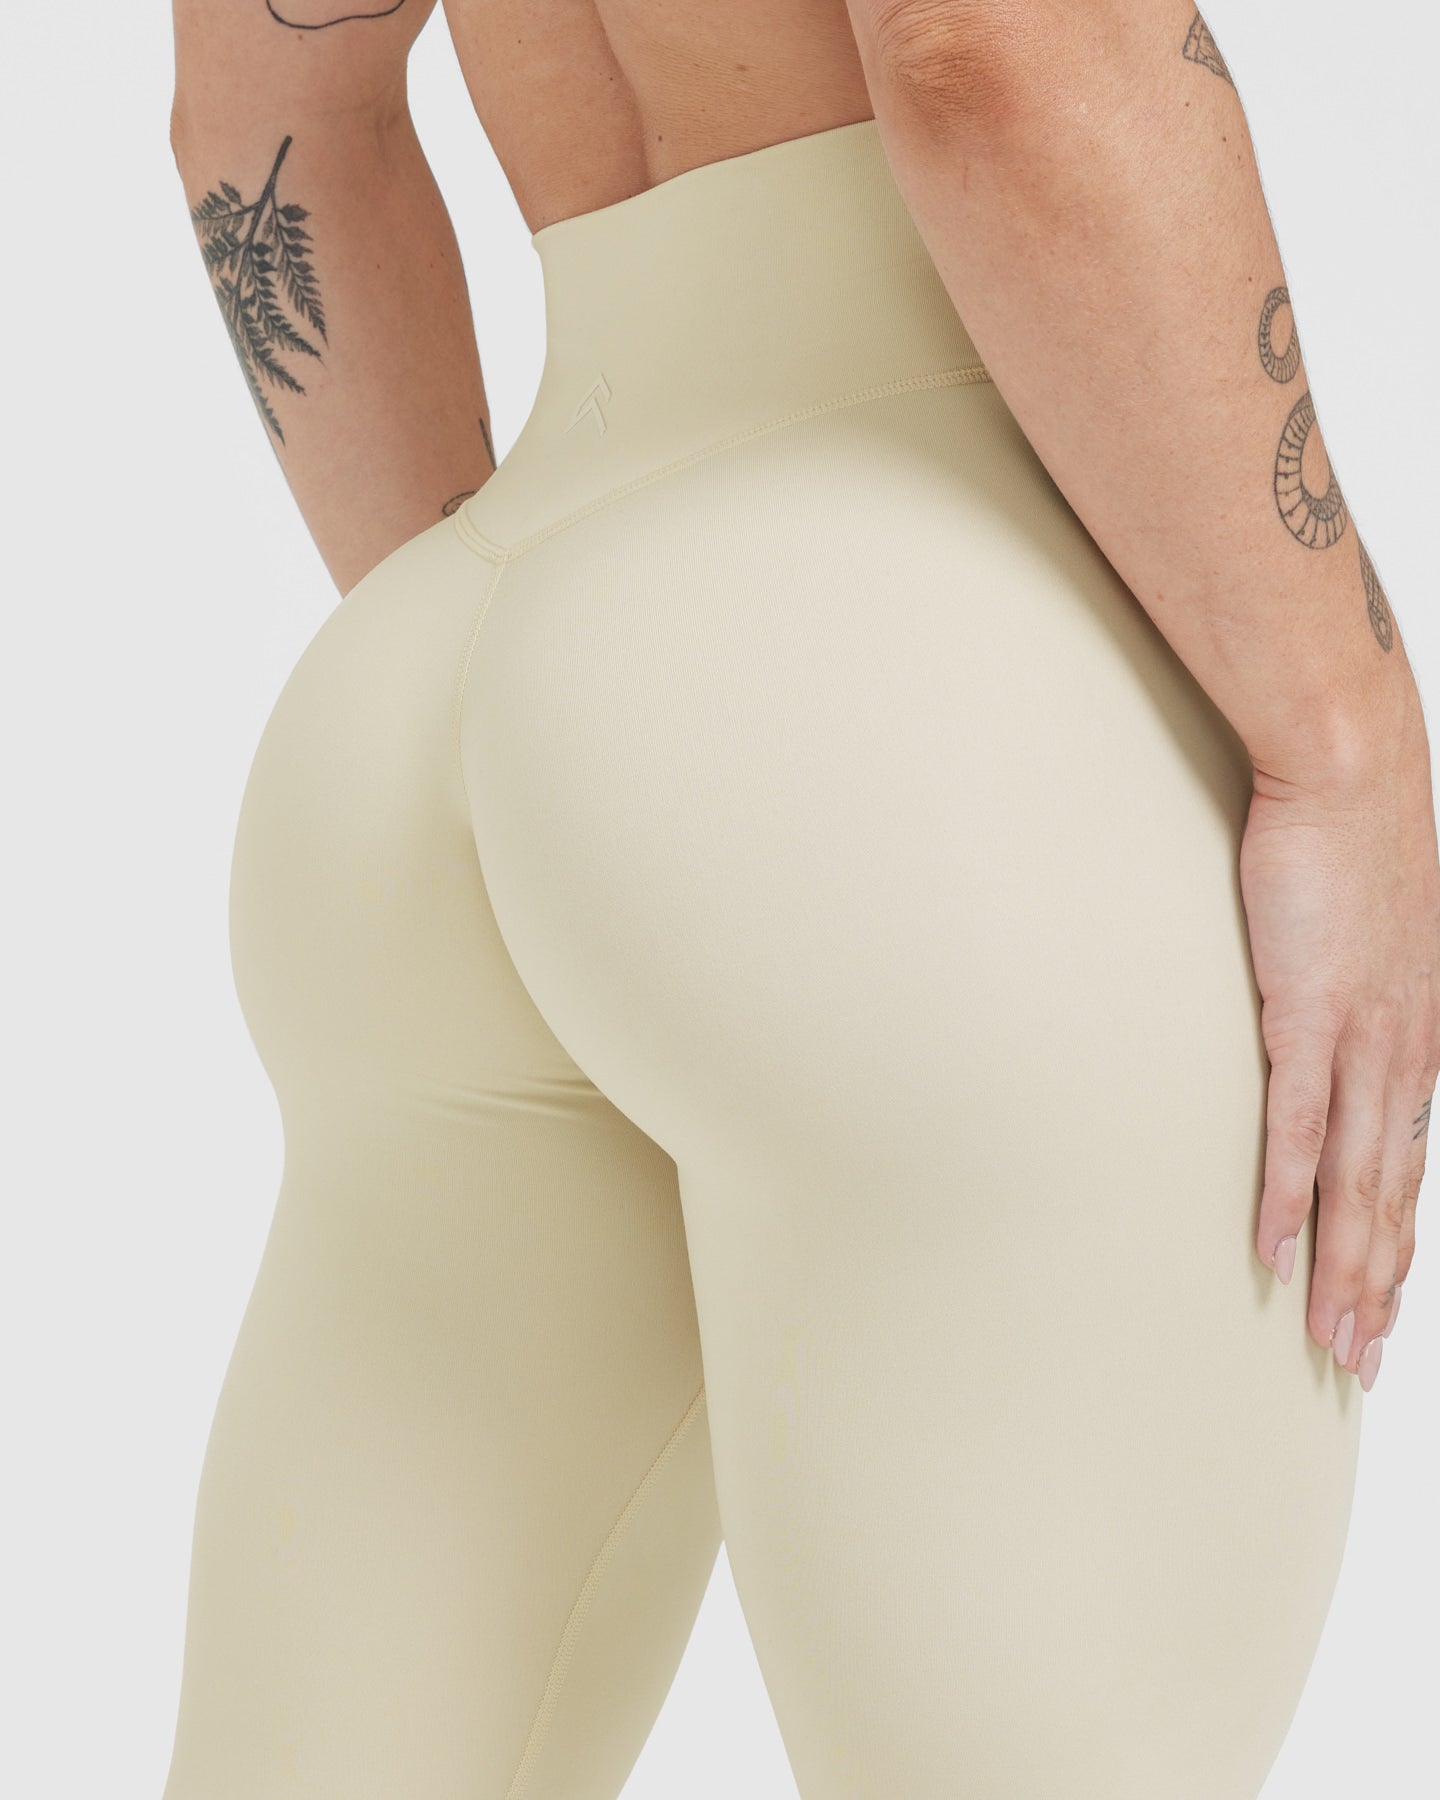 Shop our TIMELESS HIGH WAISTED LEGGINGS in MINKY - designed to